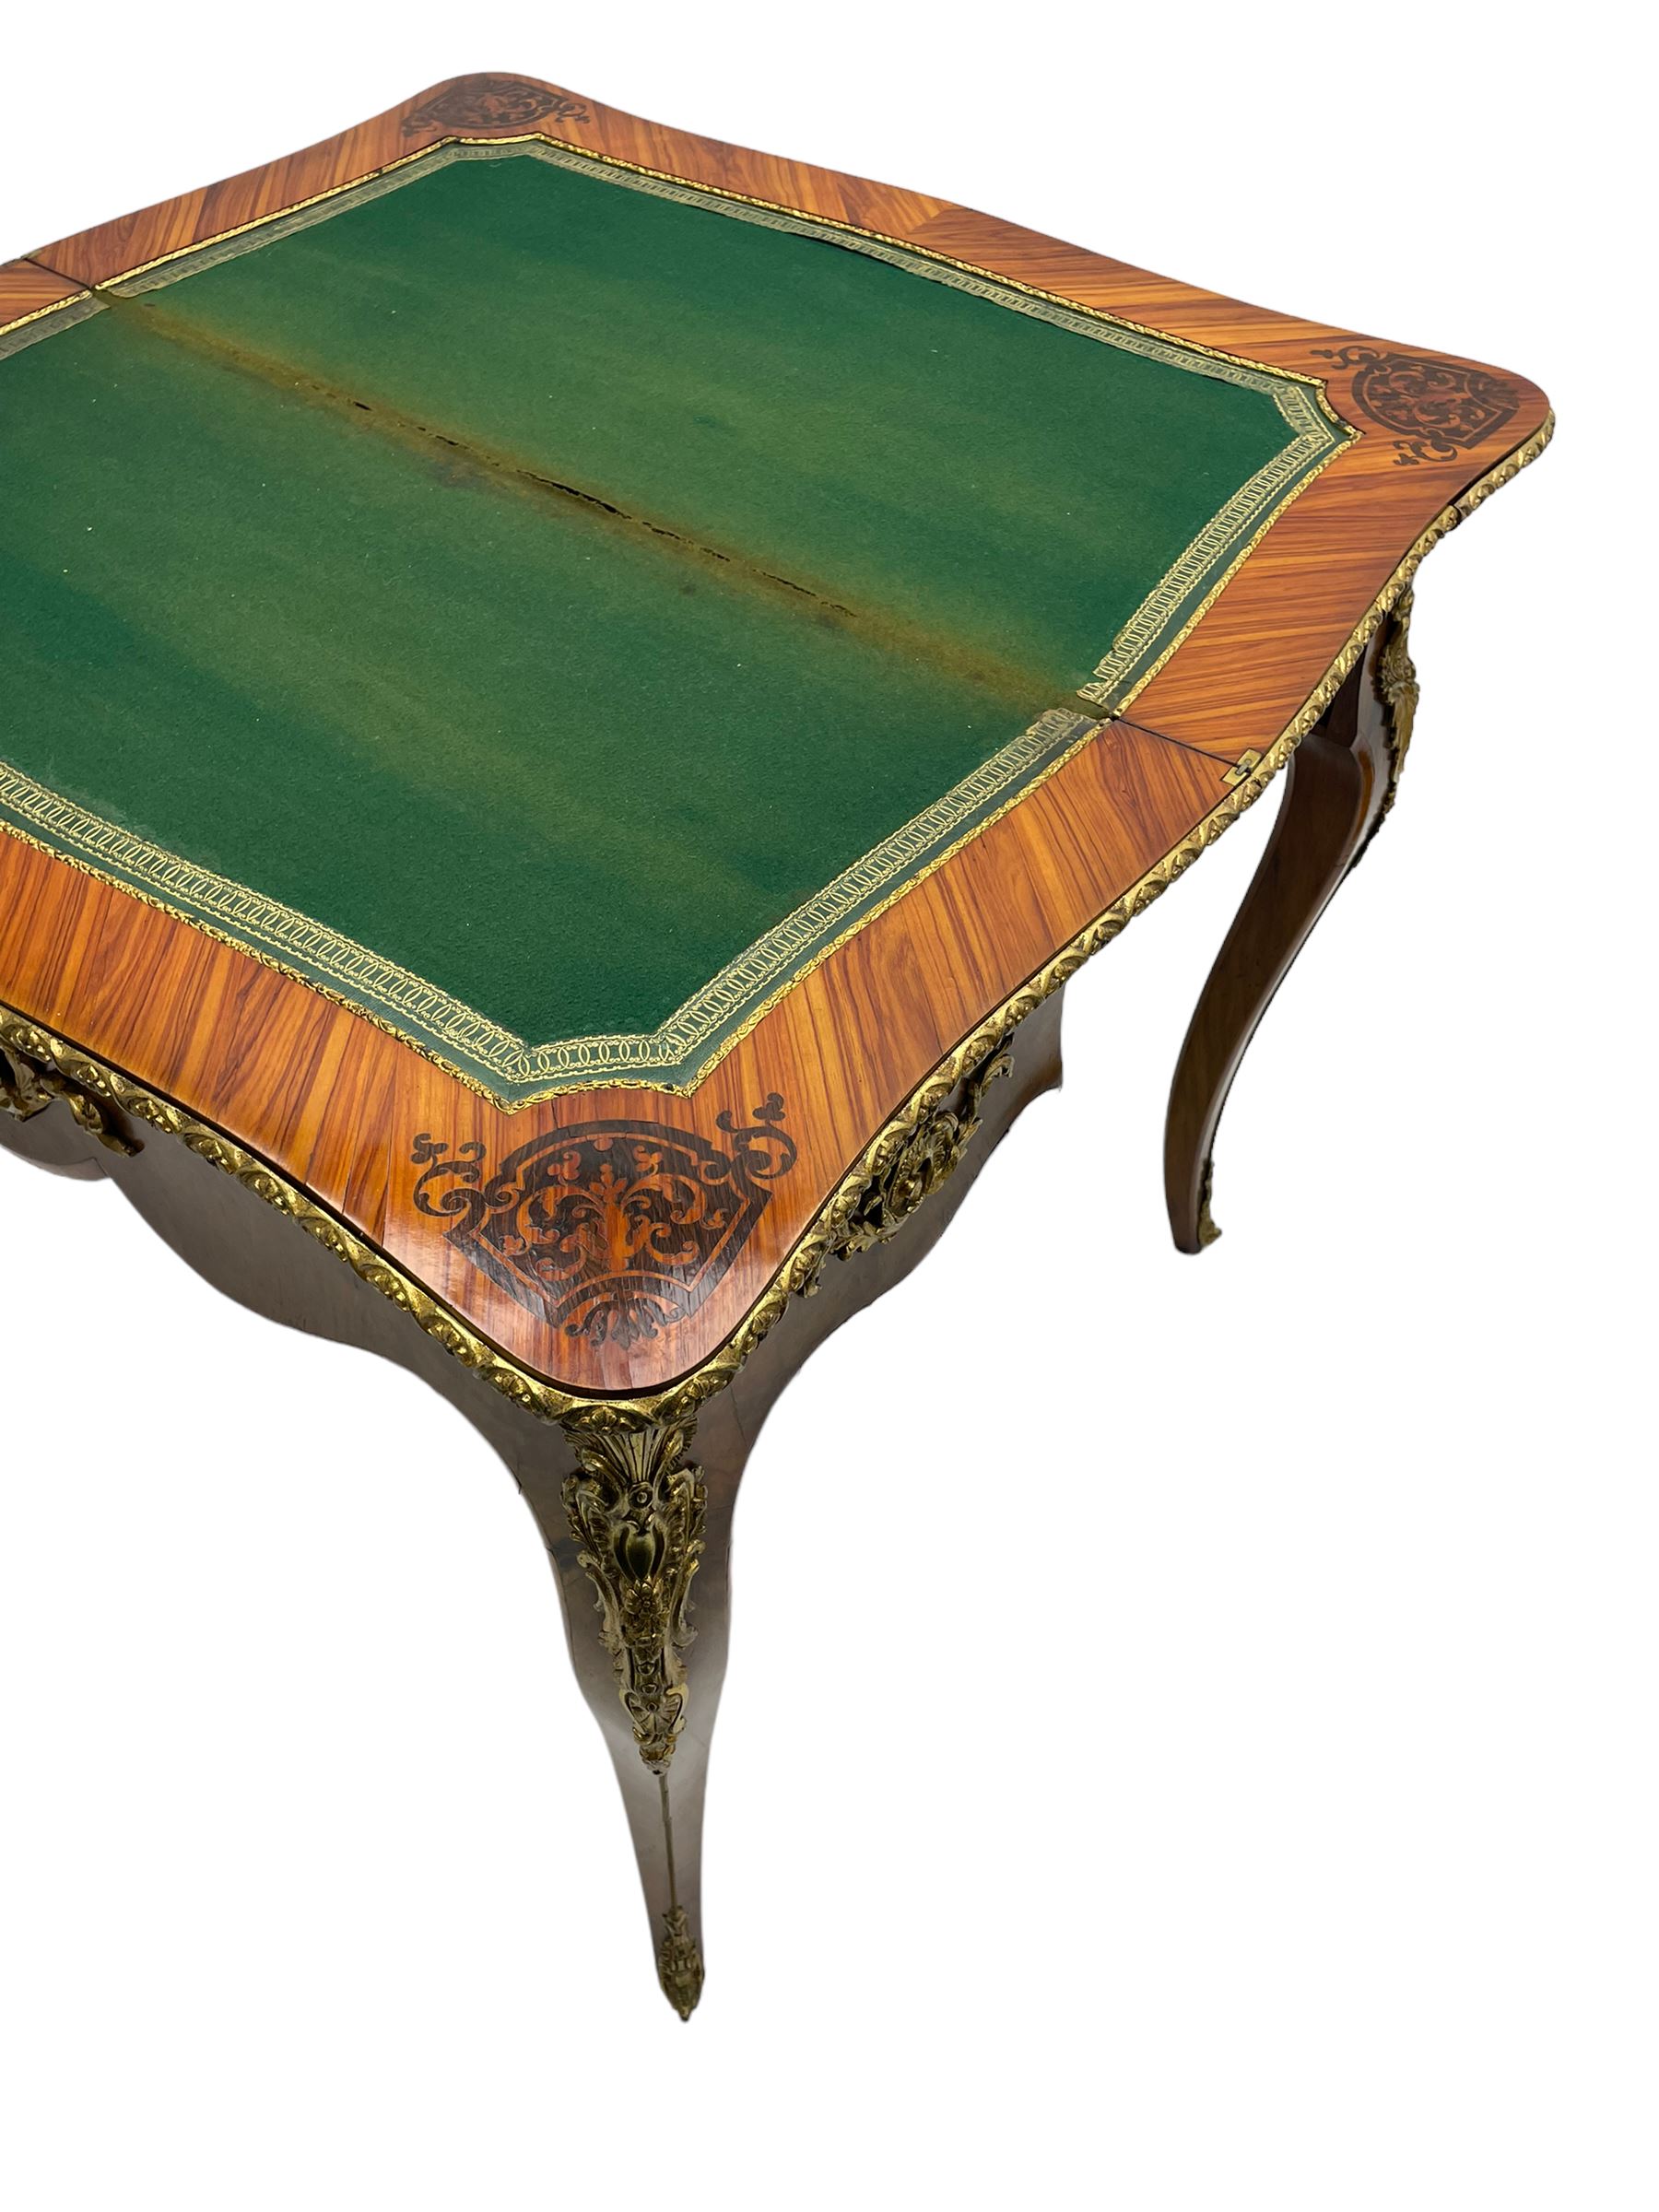 20th century French walnut and Kingwood card table - Image 9 of 15